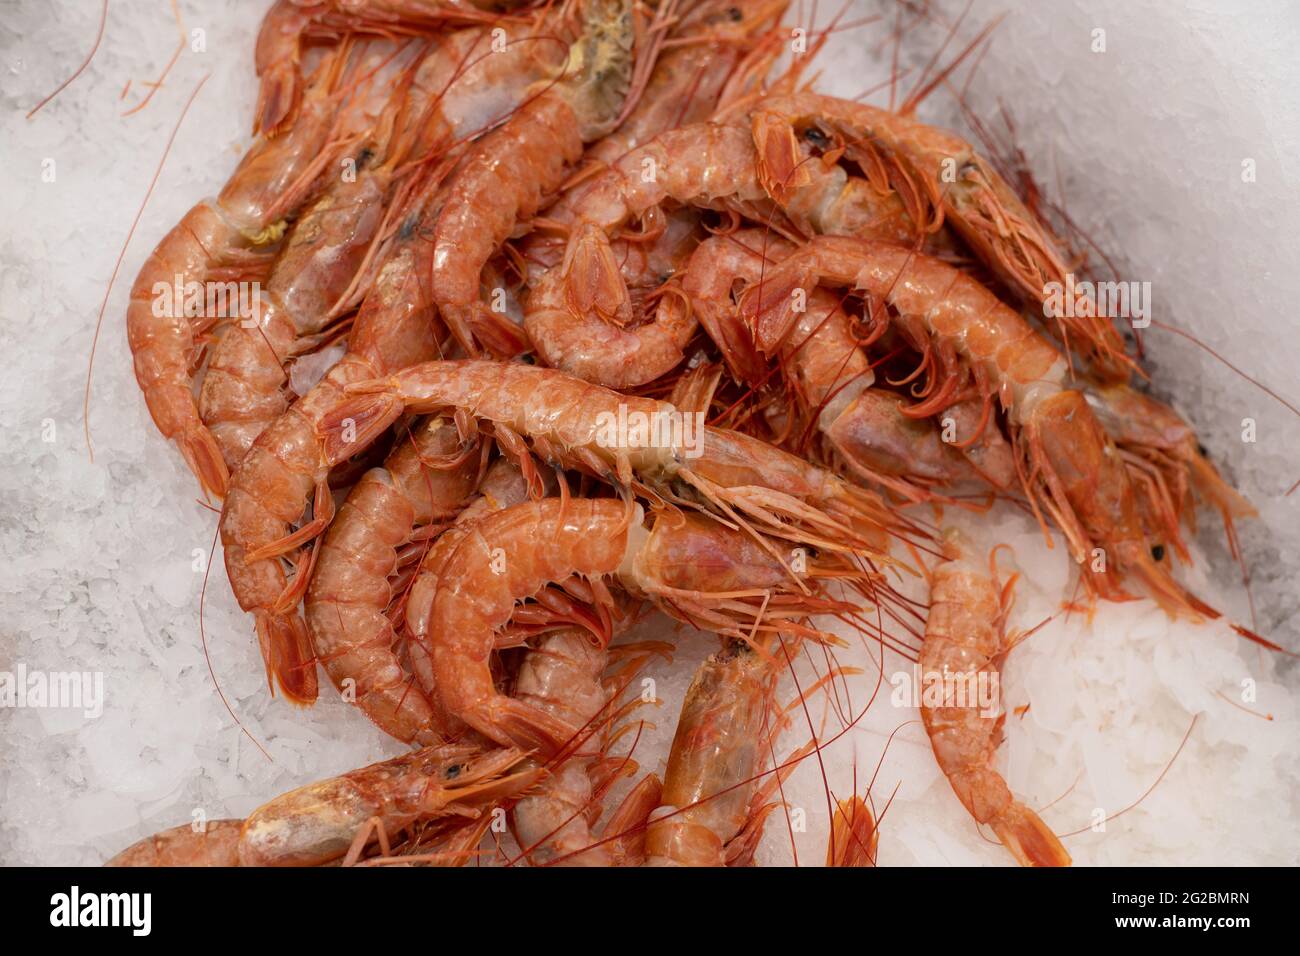 Red argentine shrimps on ice for sale Stock Photo